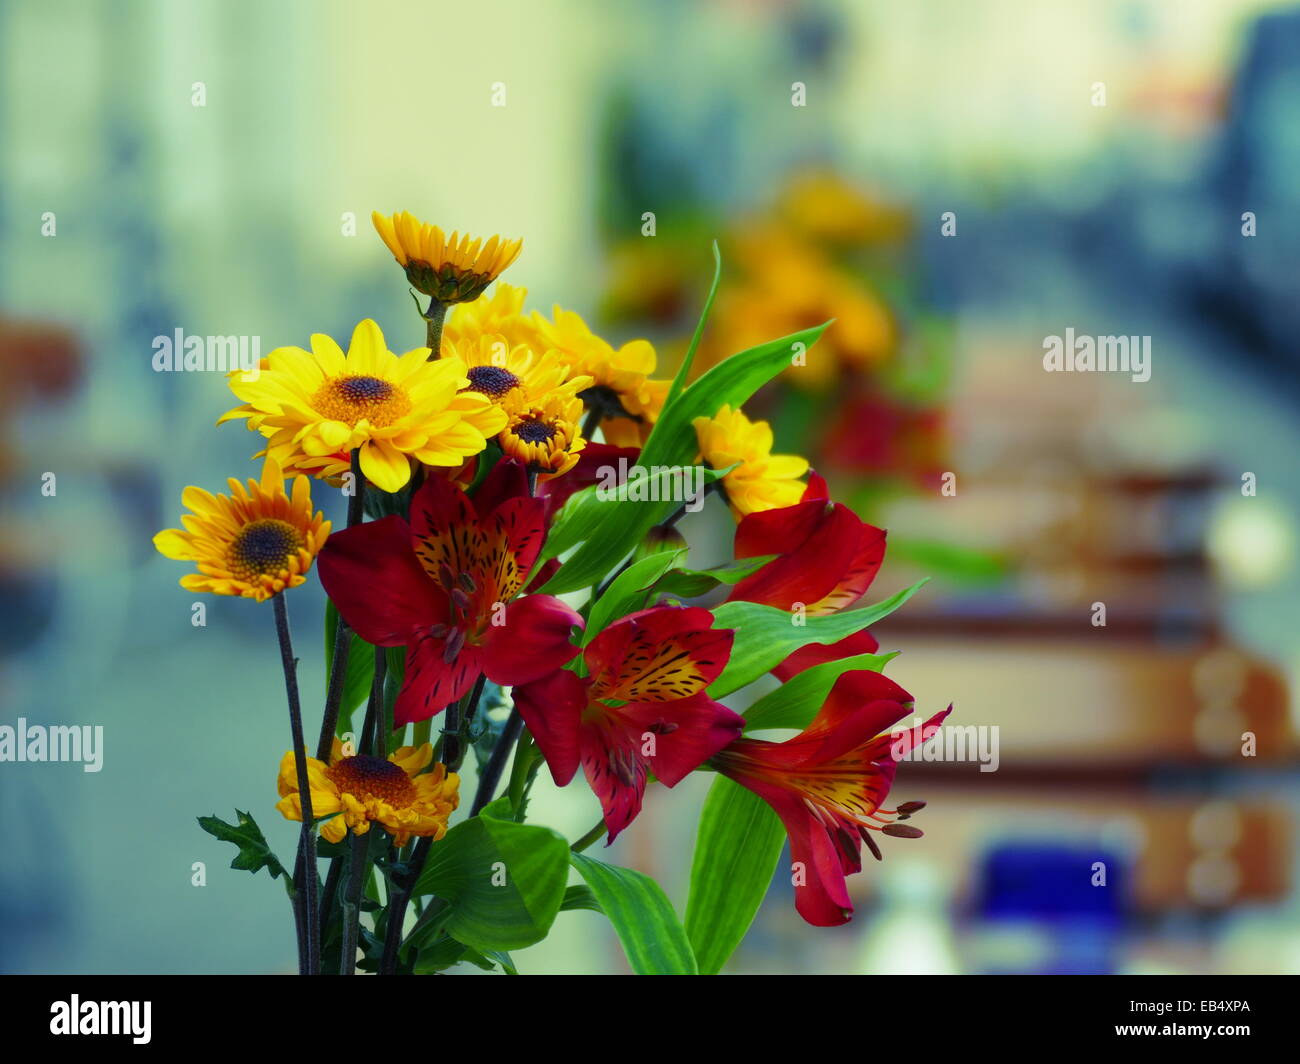 Bunch of flowers decorated on restaurant table Stock Photo